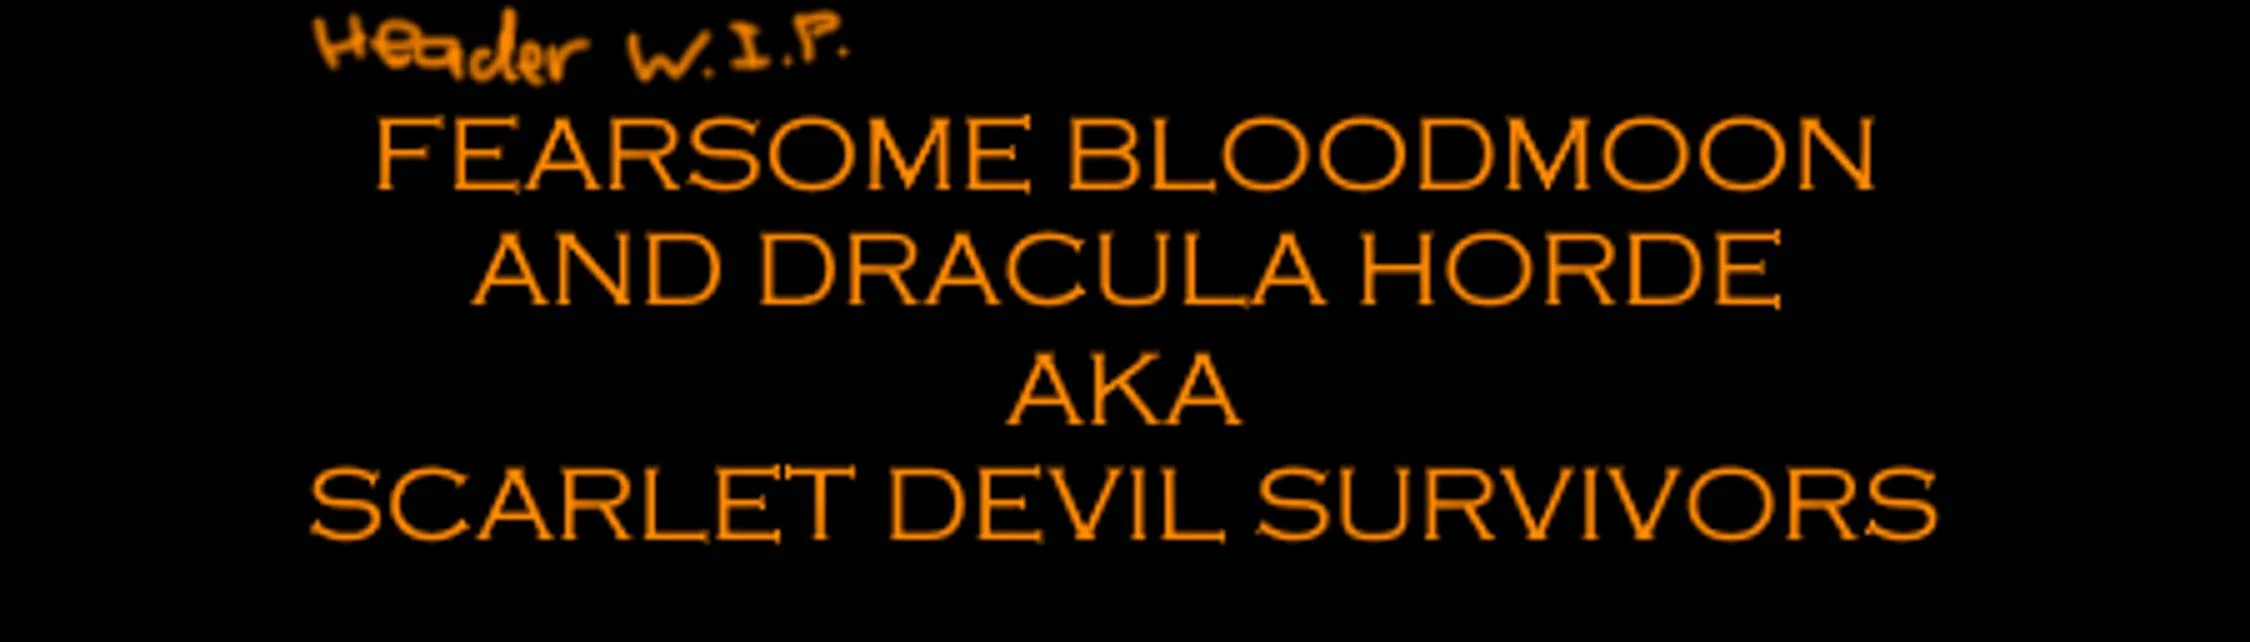 Fearsome Bloodmoon And Dracula Horde (aka Scarlet Devil Survivors